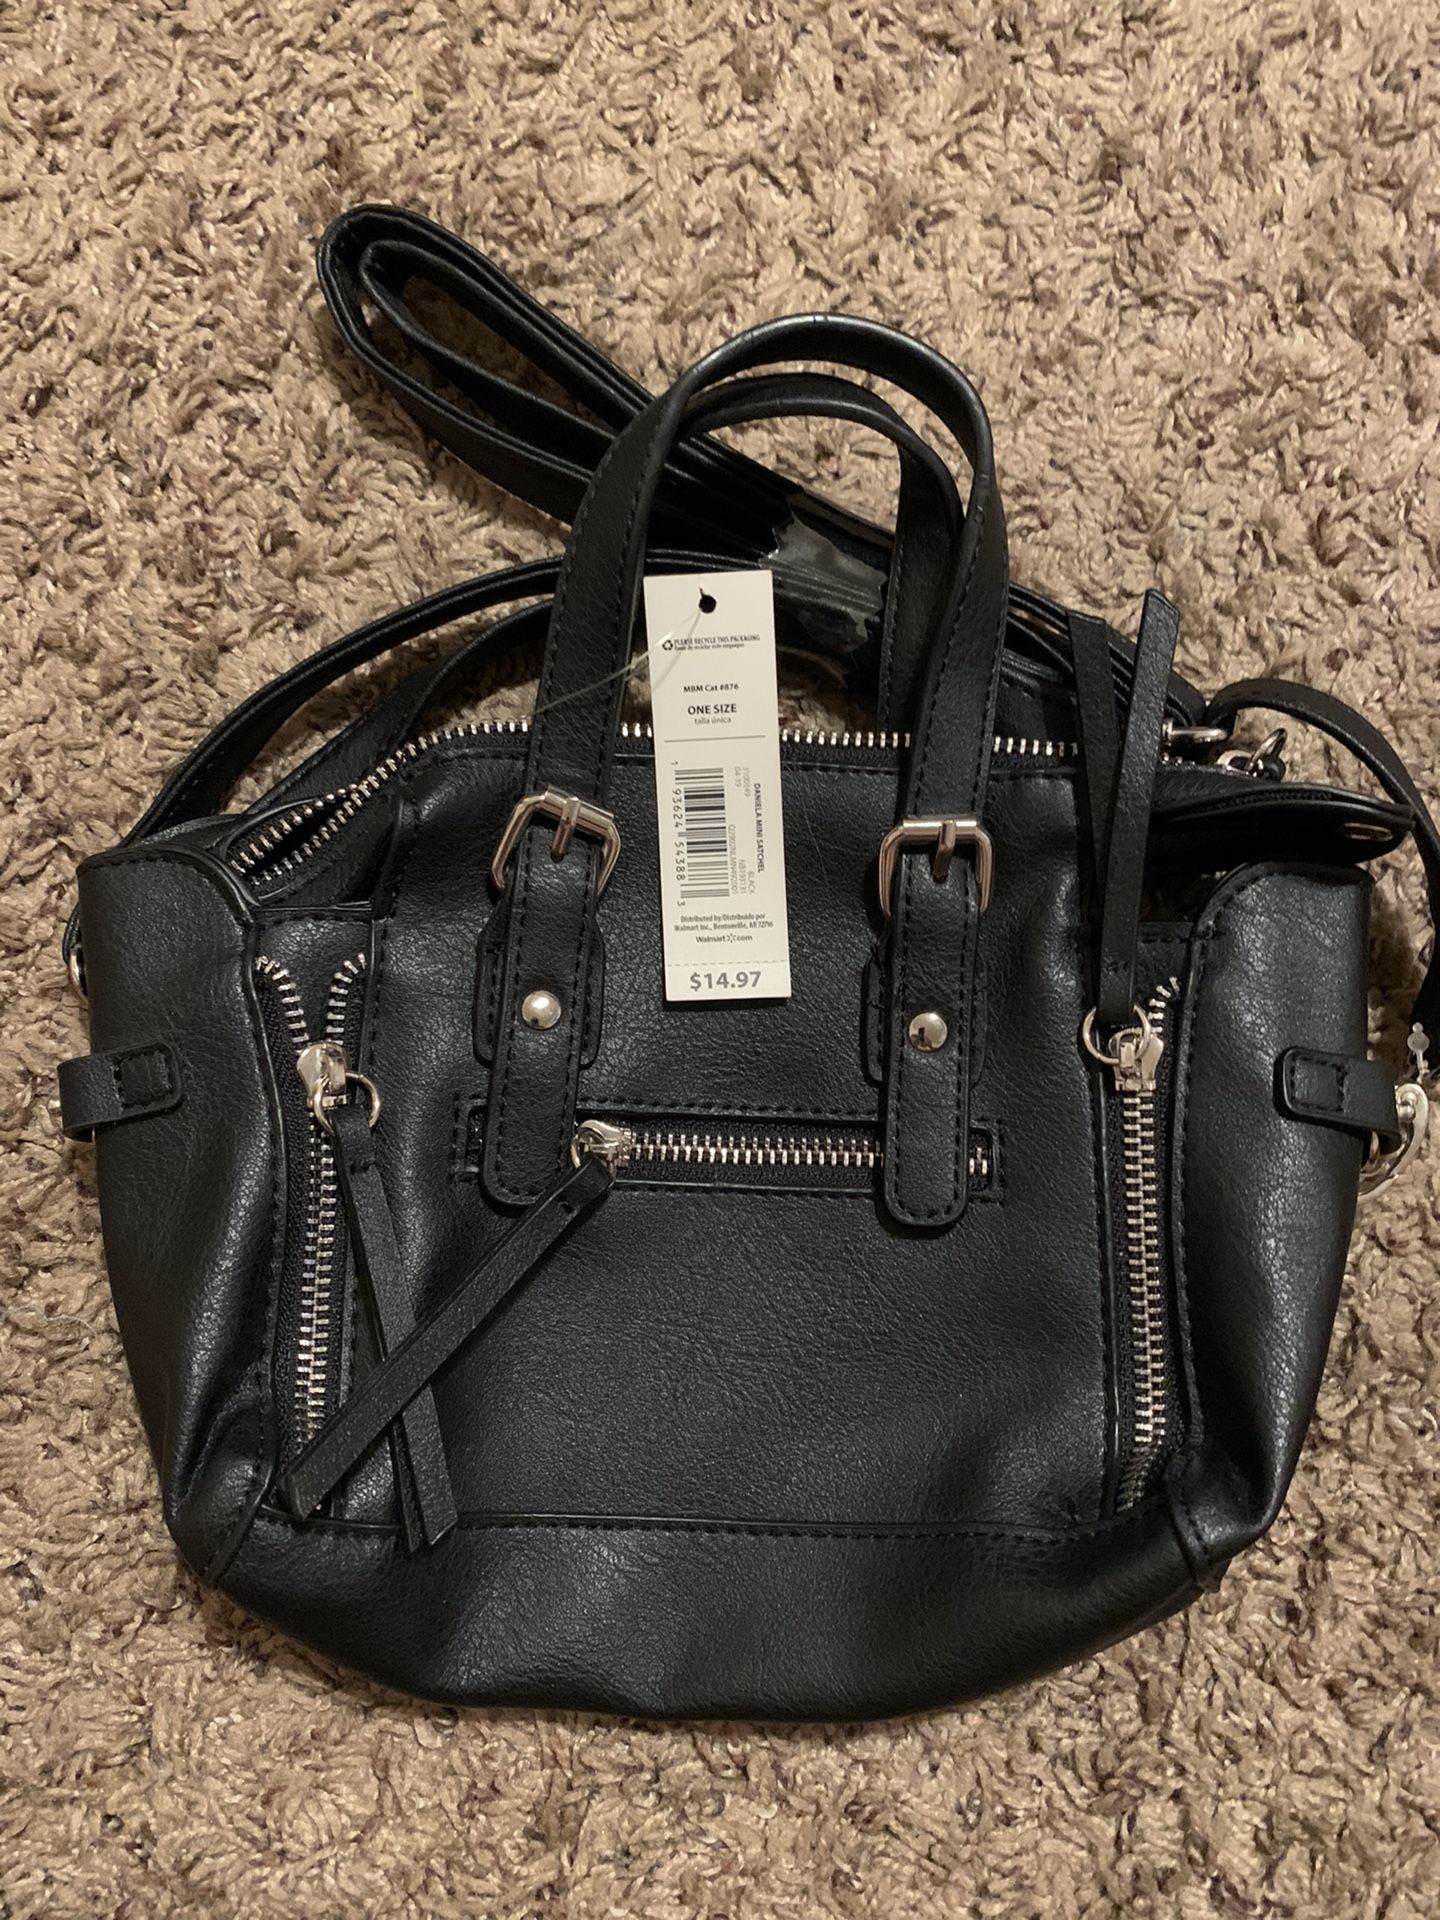 Black Purse - New With Tags